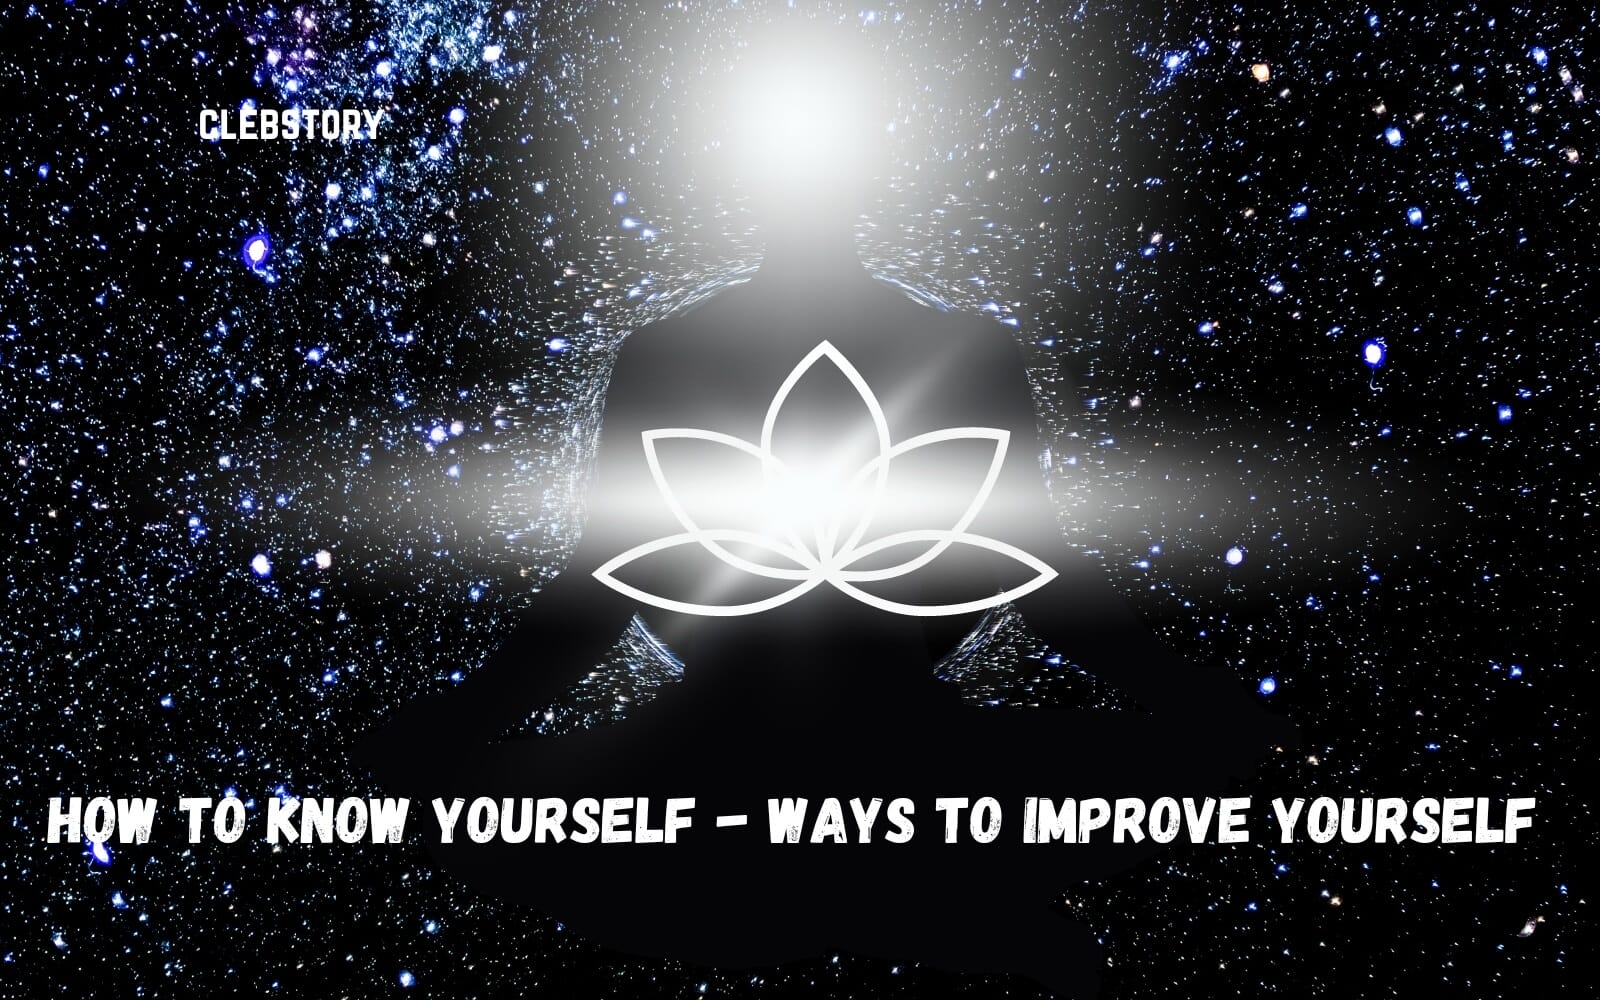 How to Know Yourself - Ways to Improve Yourself